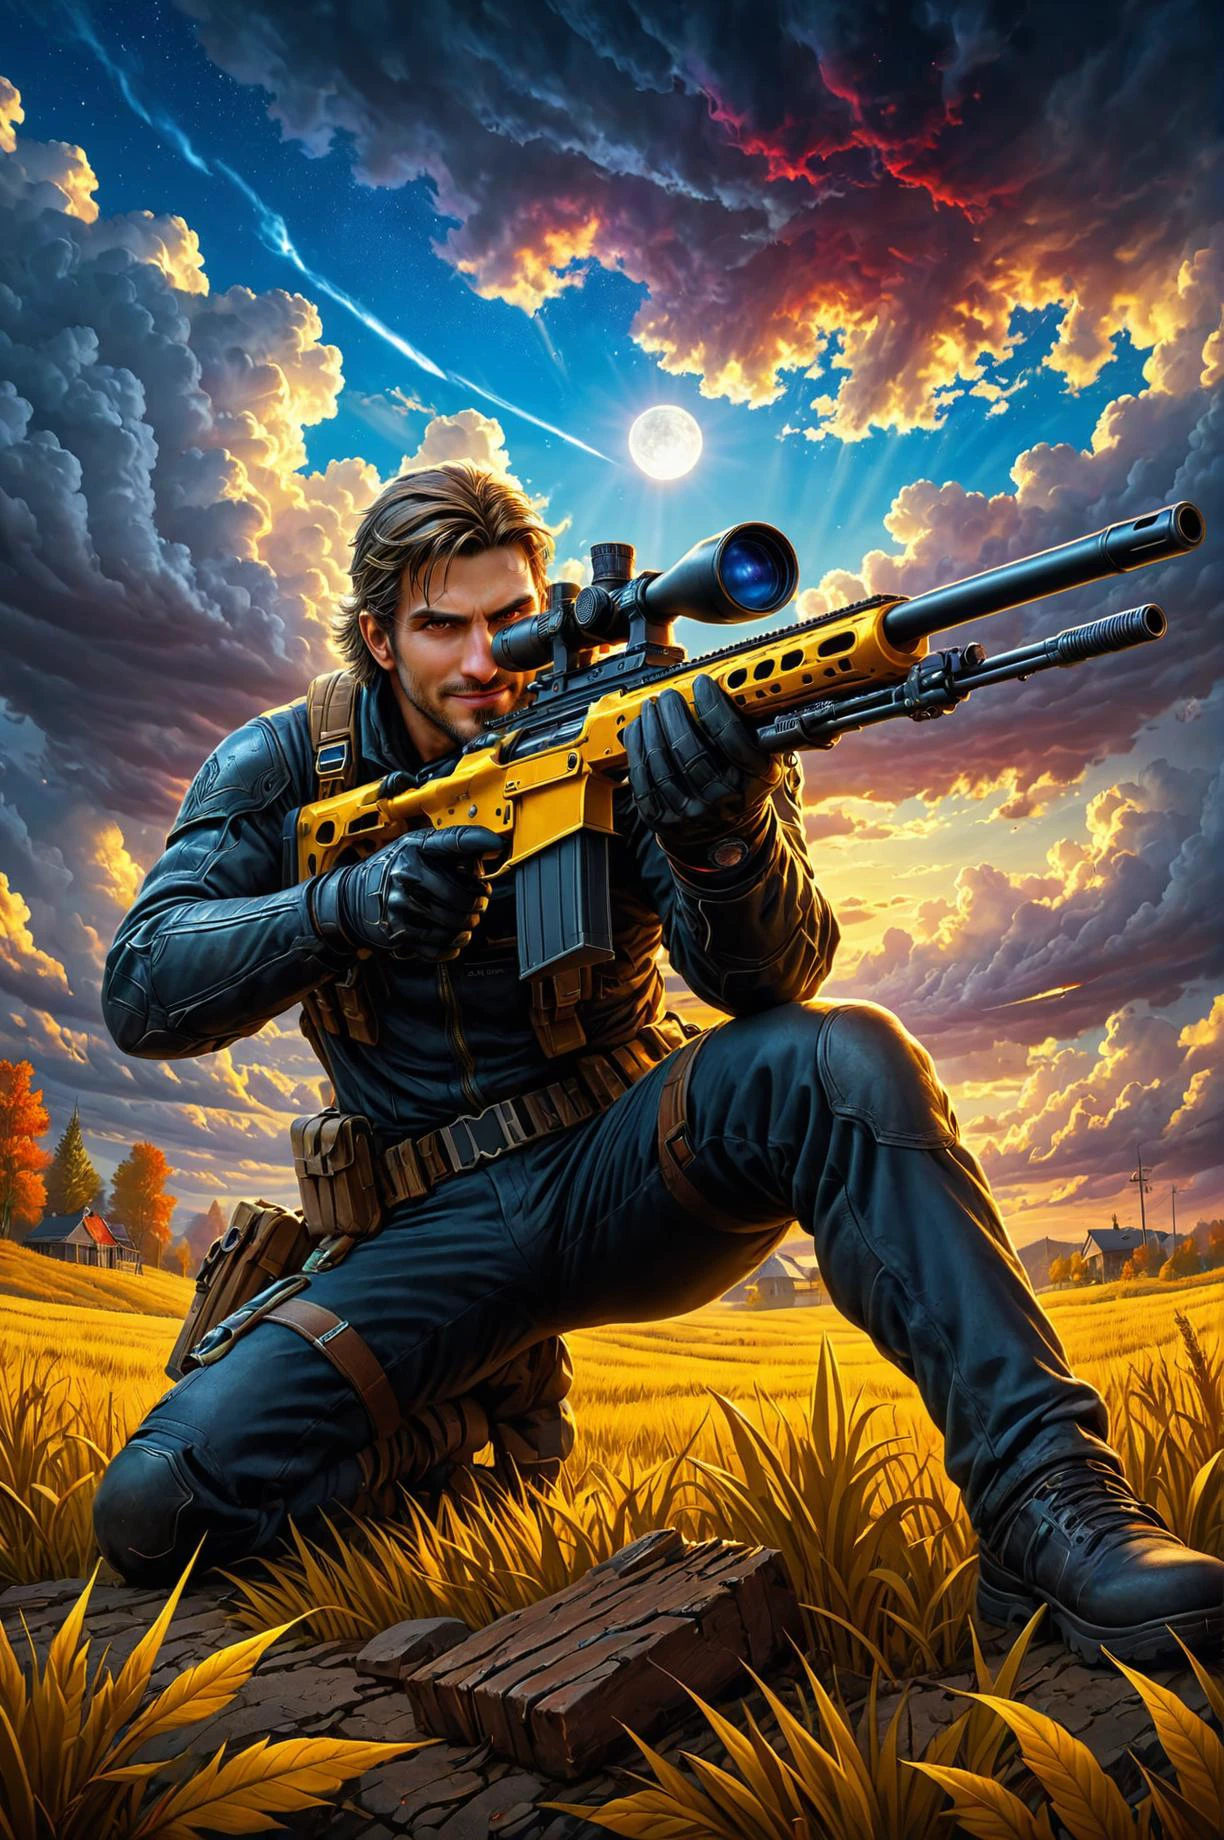 by Antonio J. Manzanedo and Asaf Hanuka in the style of Phil Koch, using a sniper rifle vibrant dream 